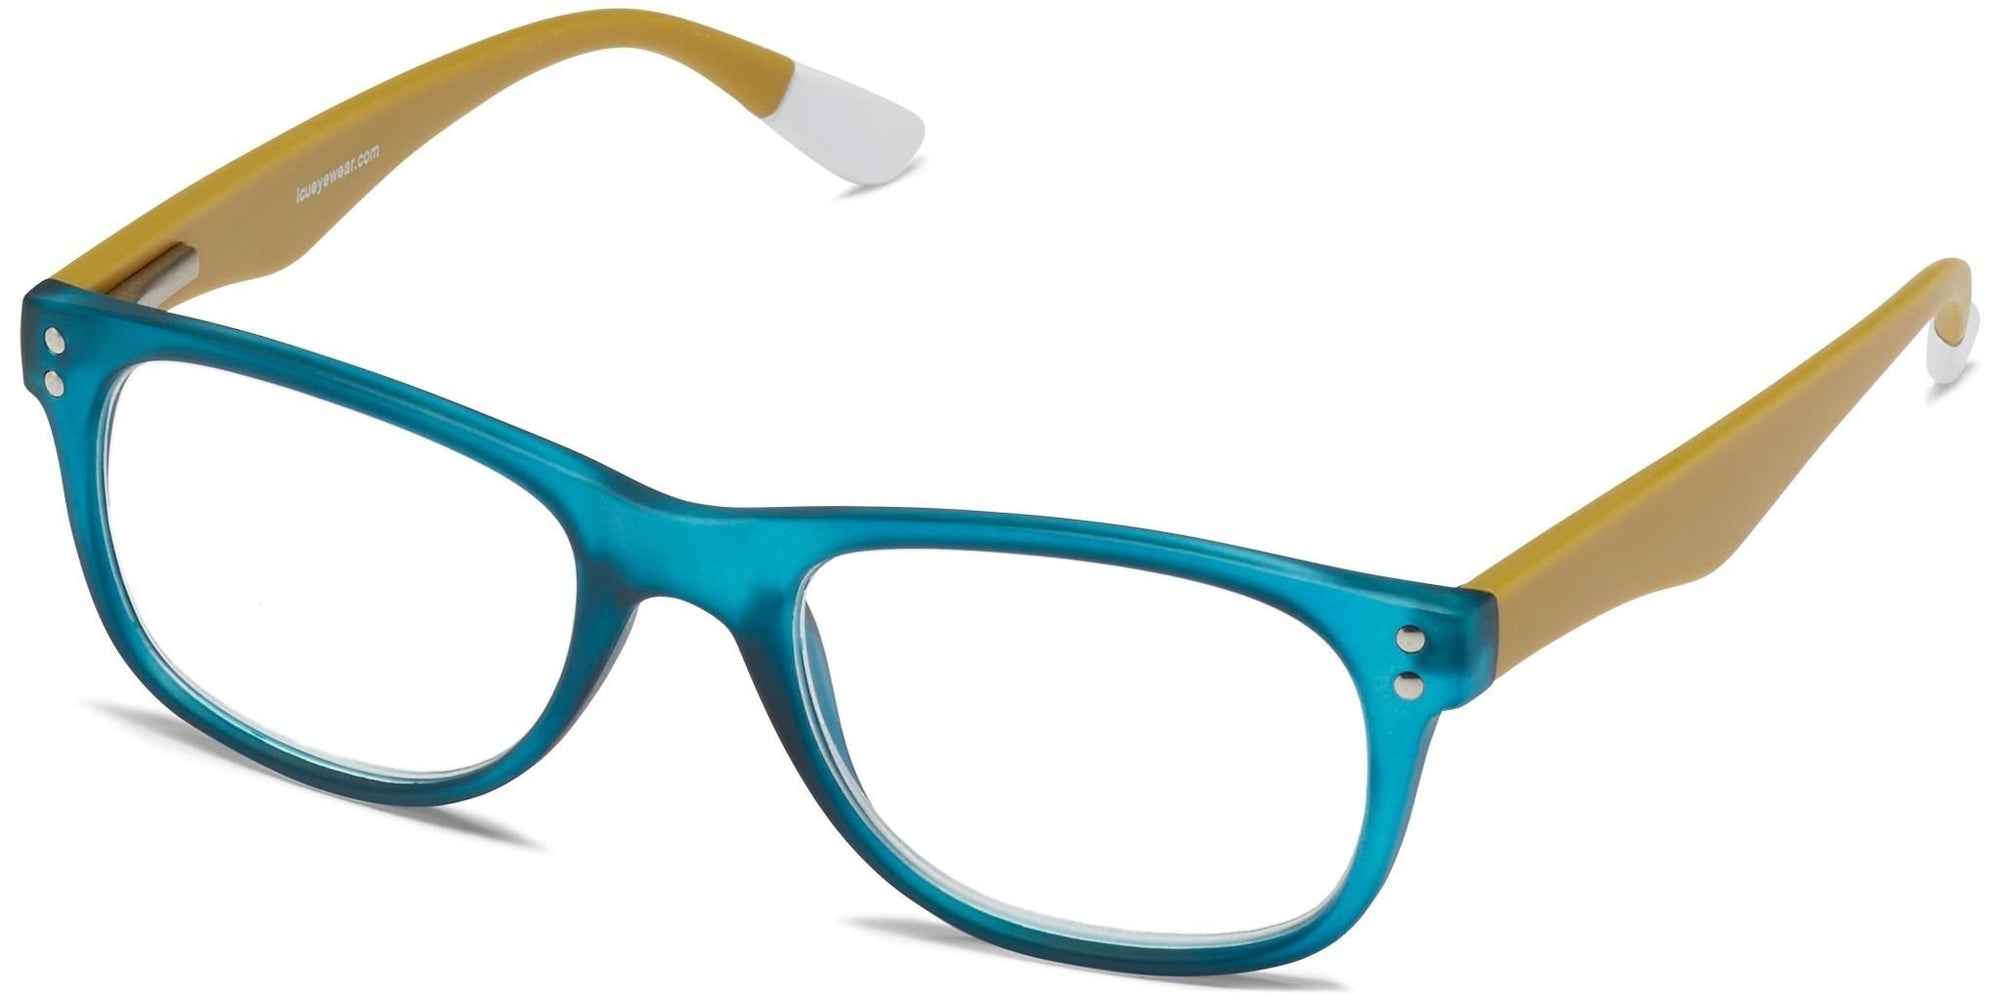 Lucerne - Teal with Green / 1.25 - Reading Glasses